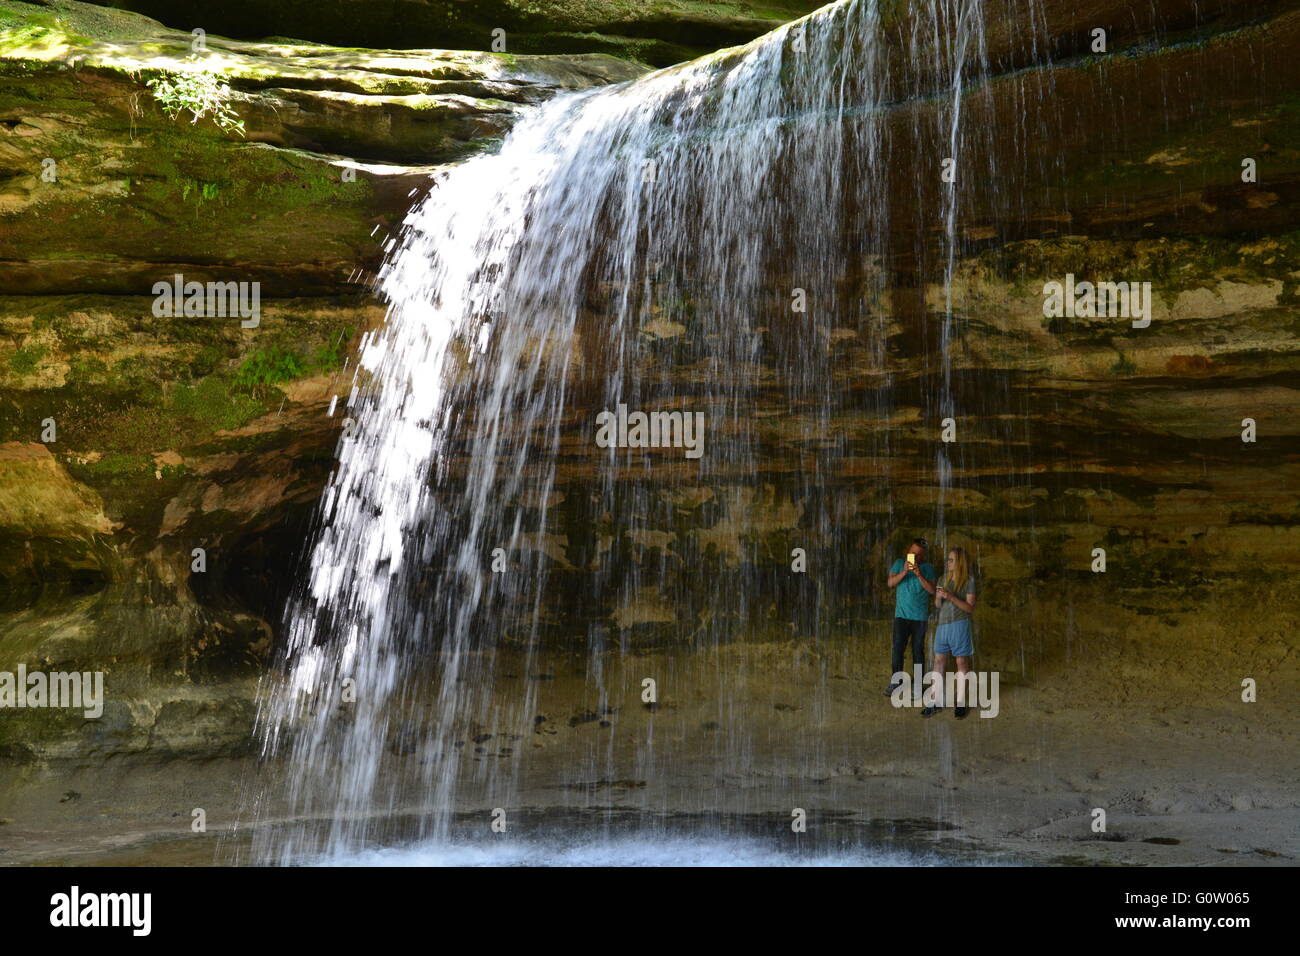 Hikers at the sandstone cliff waterfall in La Salle Canyon at Starved Rock State Park on the banks of the Illinois River. Stock Photo